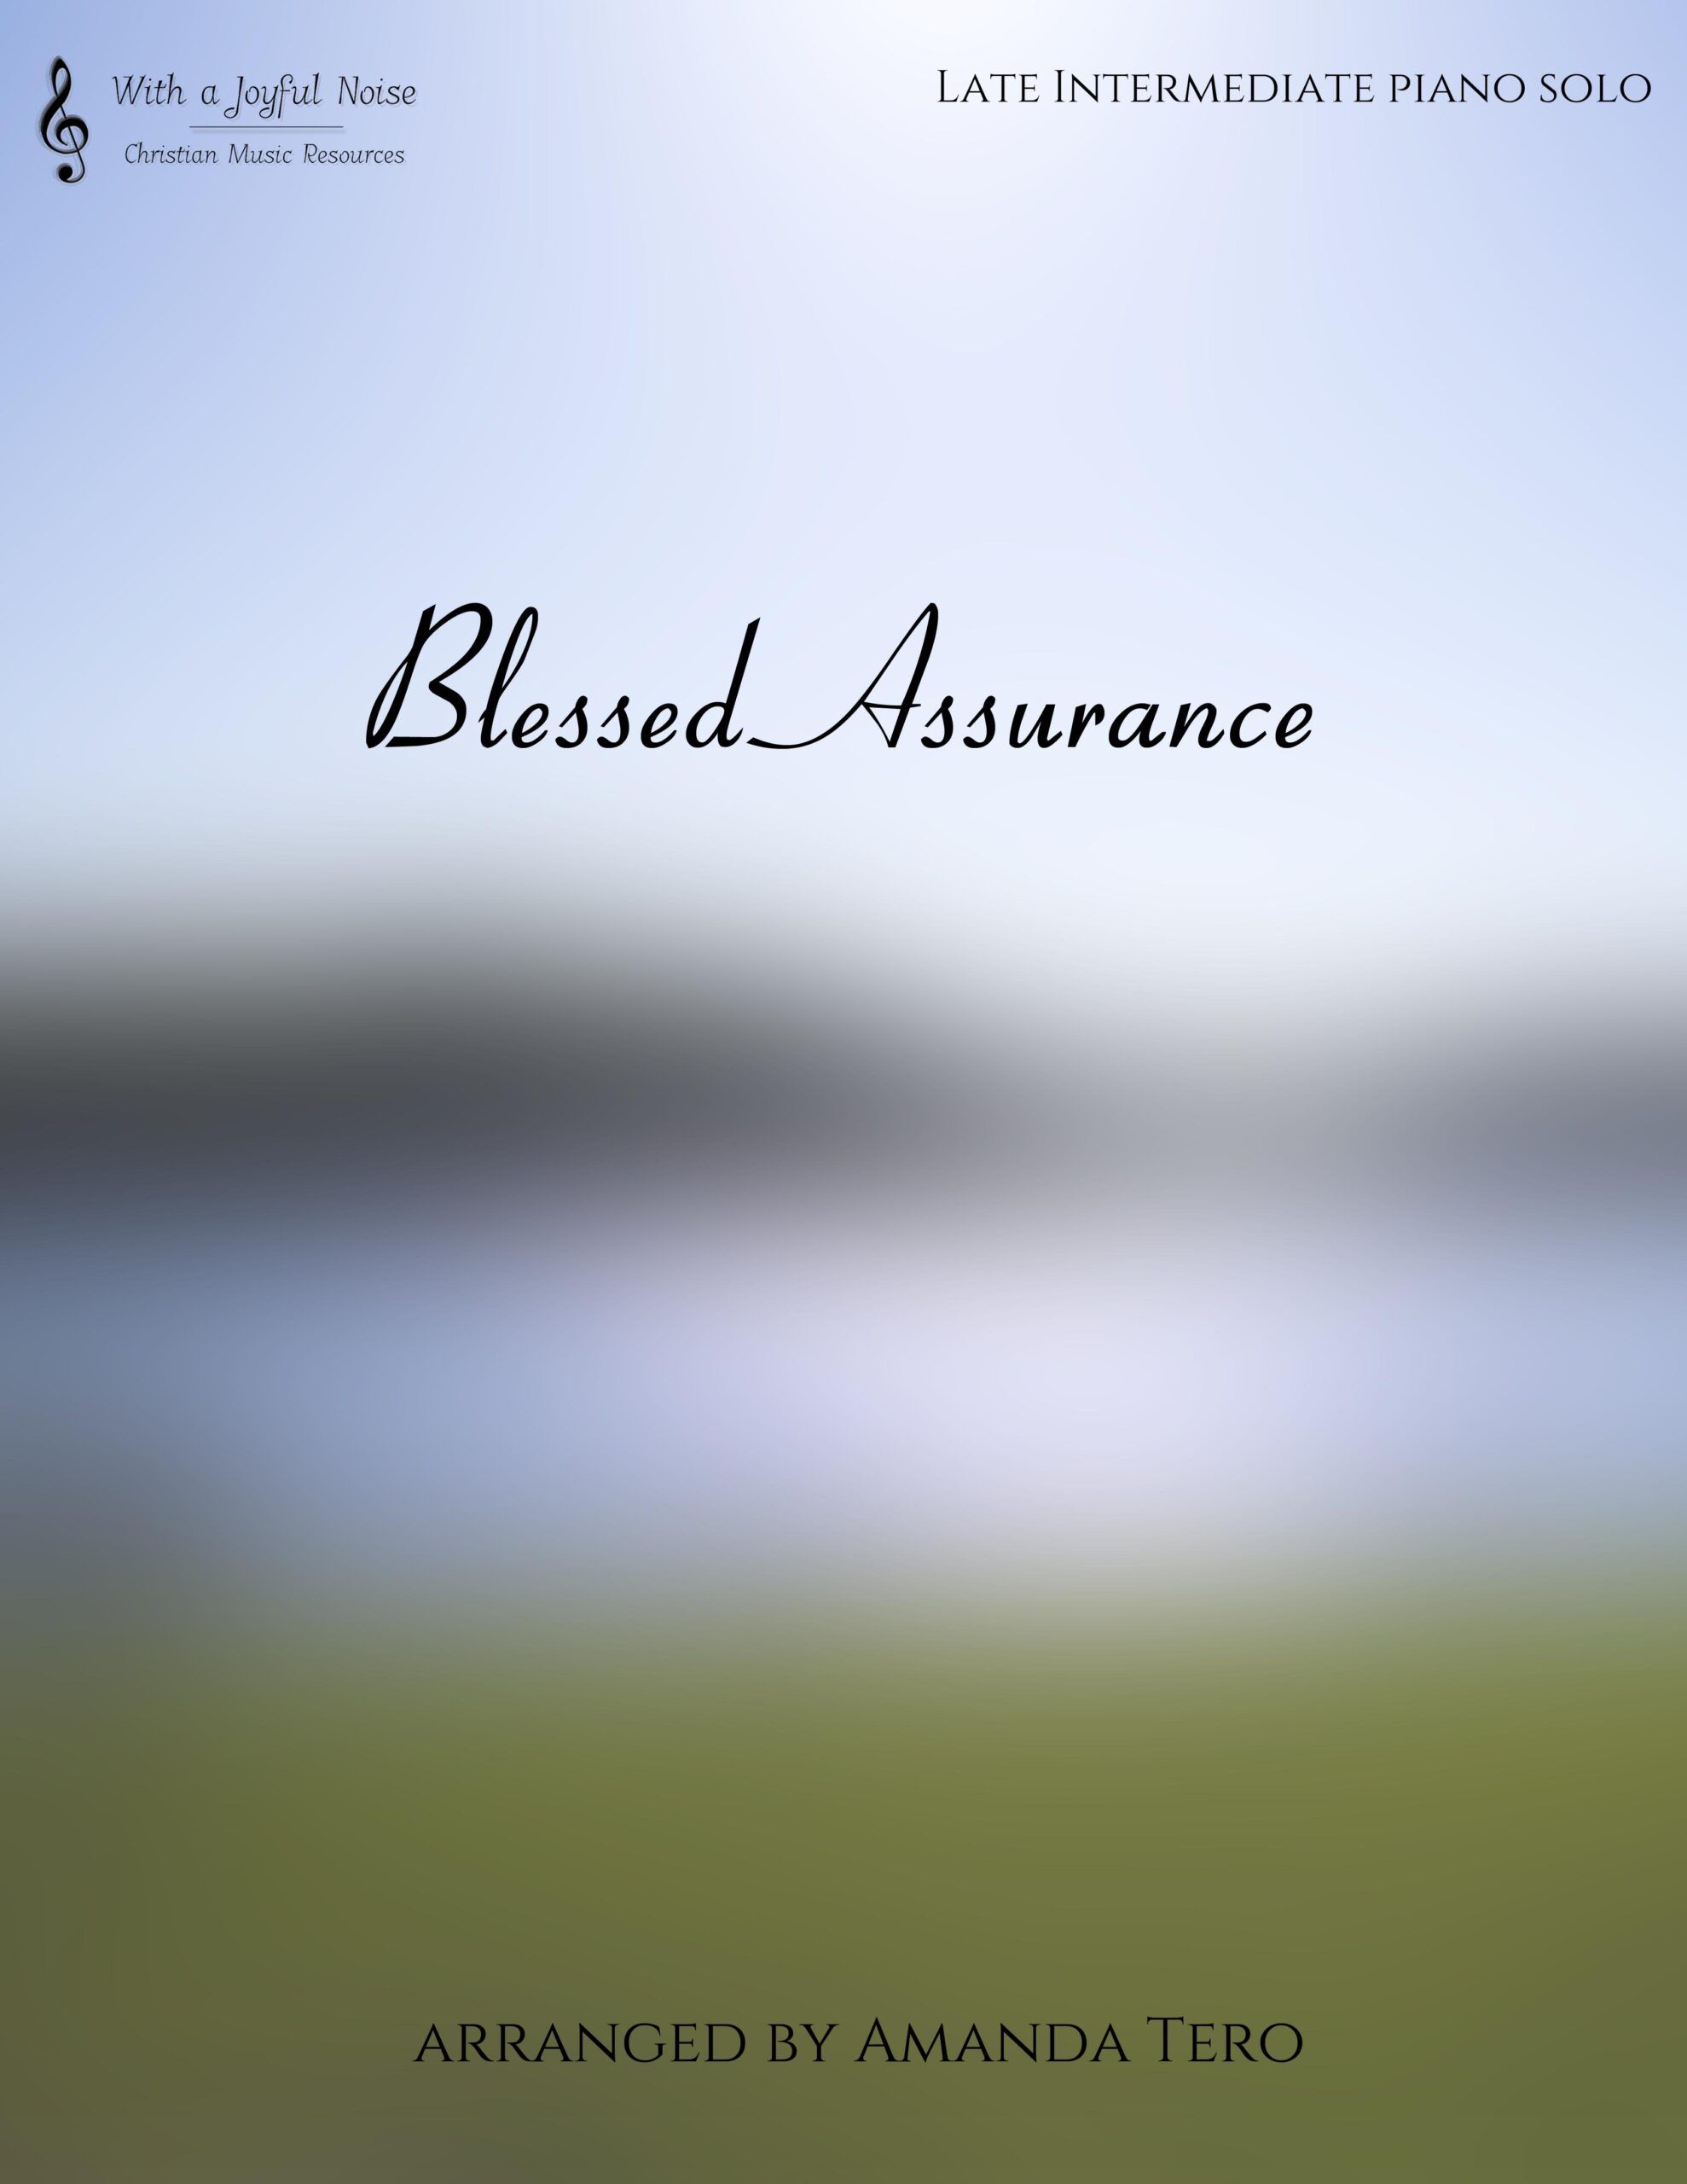 Blessed Assurance hymn late intermediate piano sheet music solo